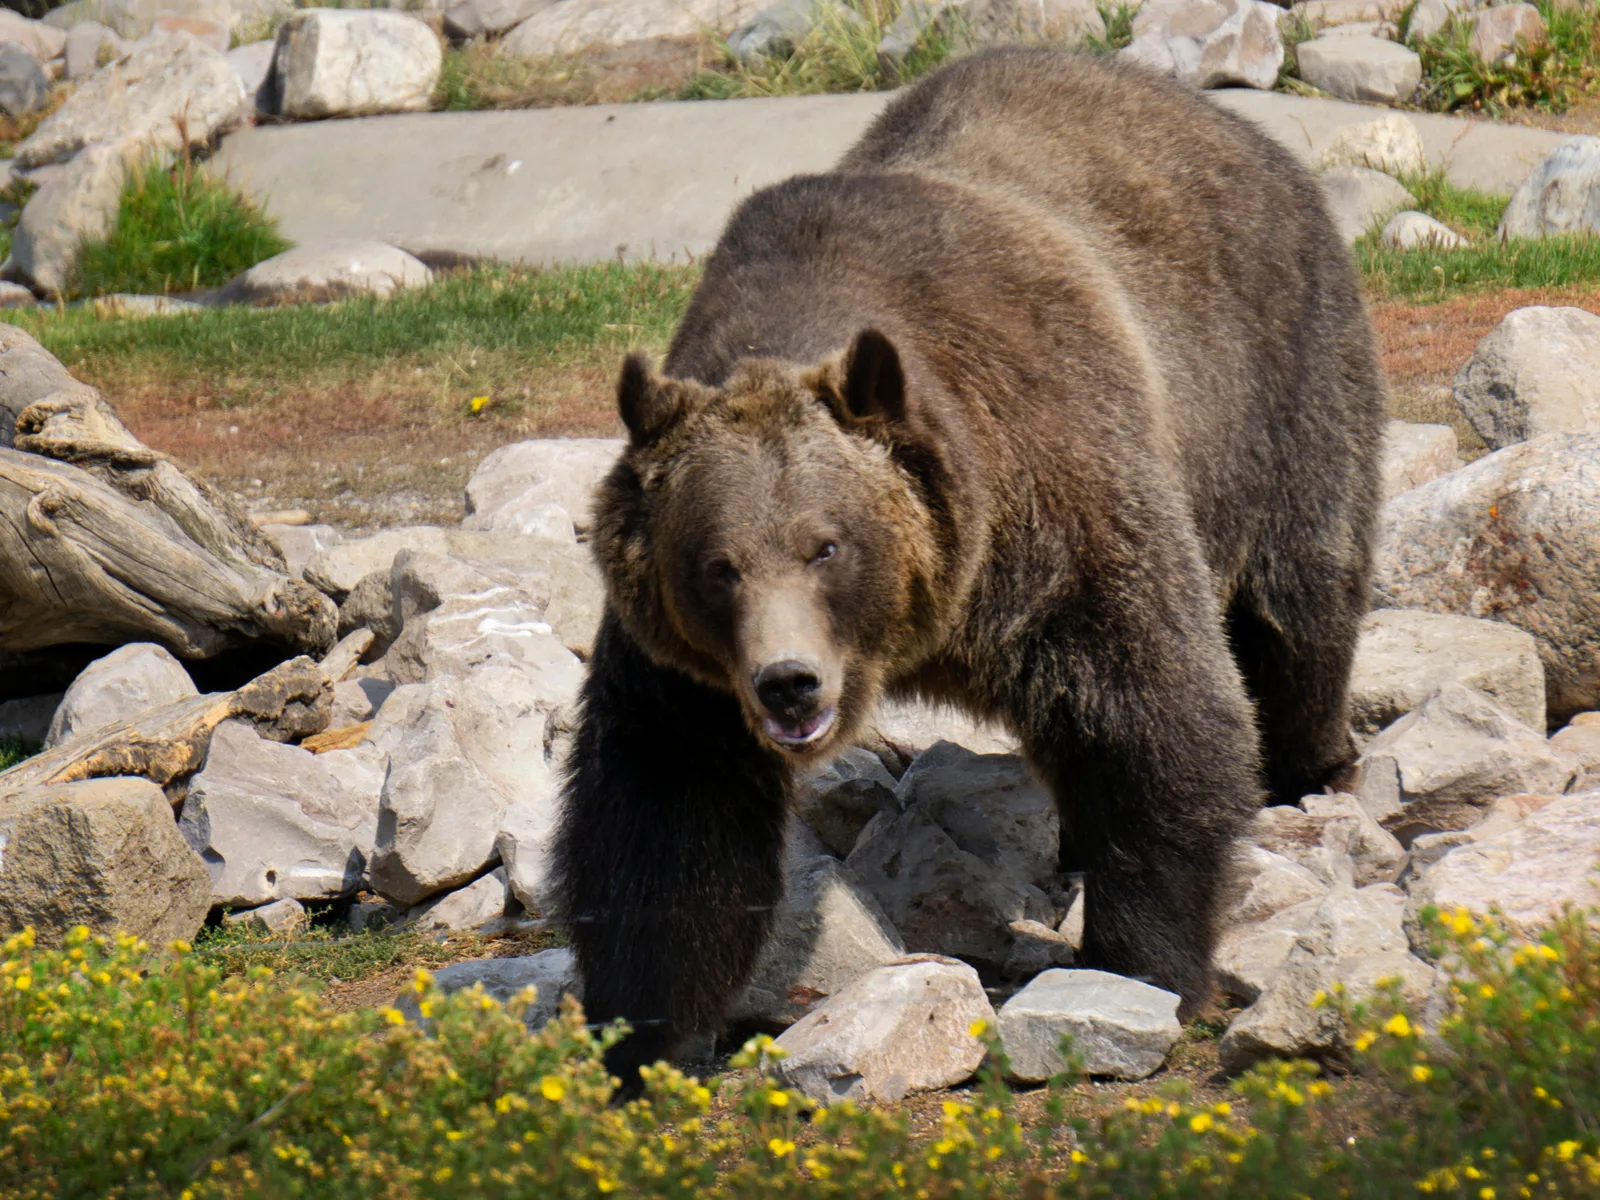 Giant bear crawling over white rocks at the Grizzly and Wolf Discovery Center, one of the best places to visit in Montana